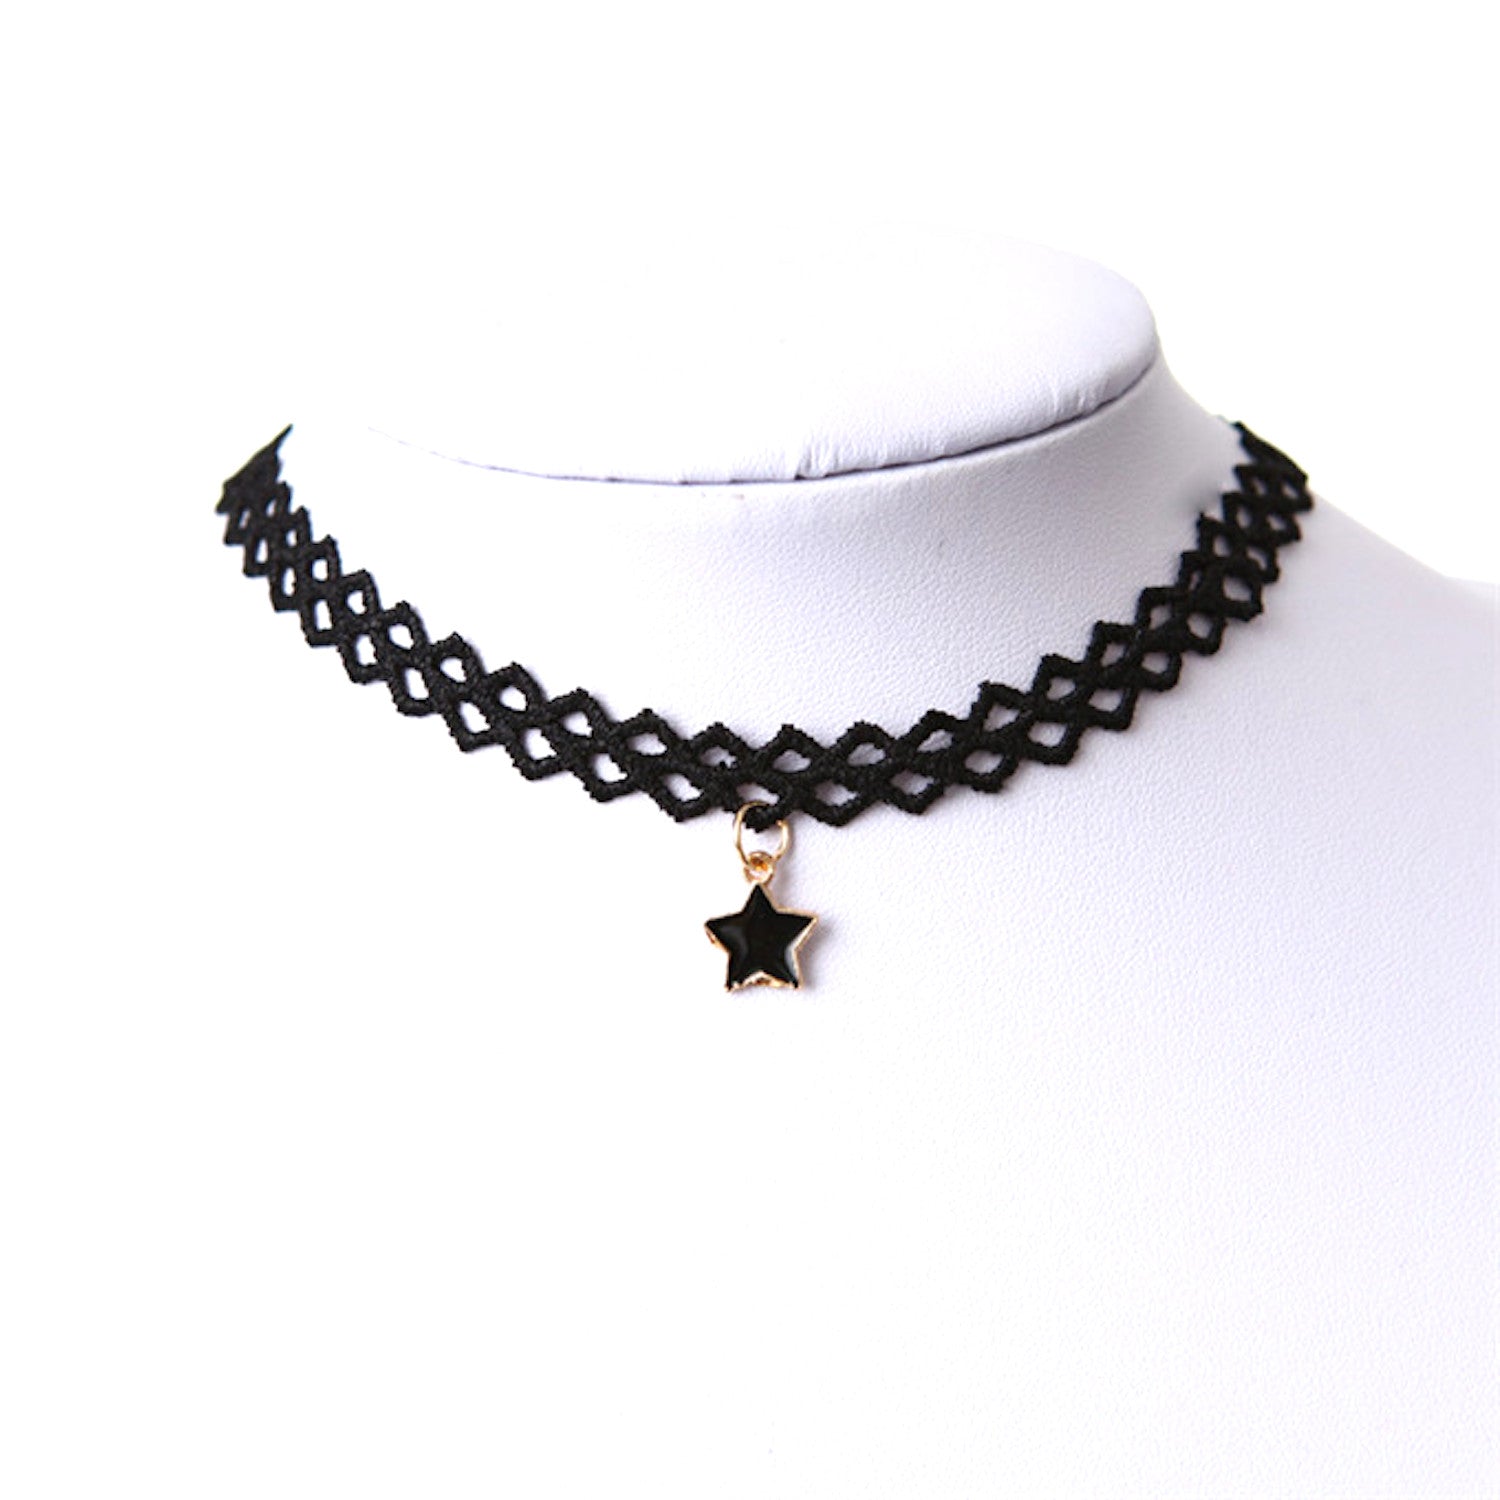 Vintage Hippy Stretch Tattoo Choker Necklace Set Elastic Chocker Black  Choker Necklace For Fishing Line Hot Selling L231004 From Designer_beanie,  $0.52 | DHgate.Com